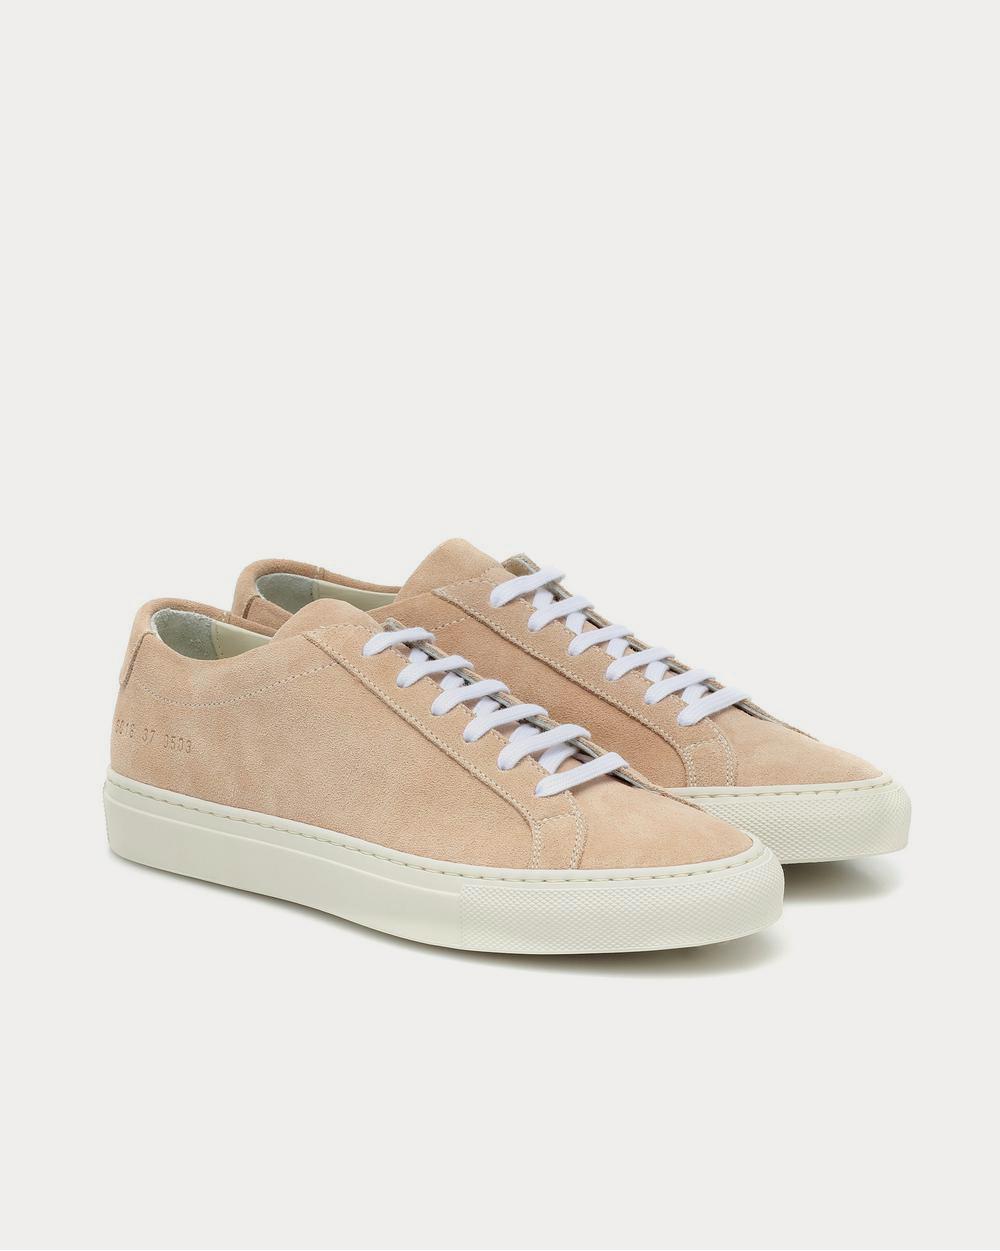 Common Projects - Original Achilles suede Amber Low Top Sneakers